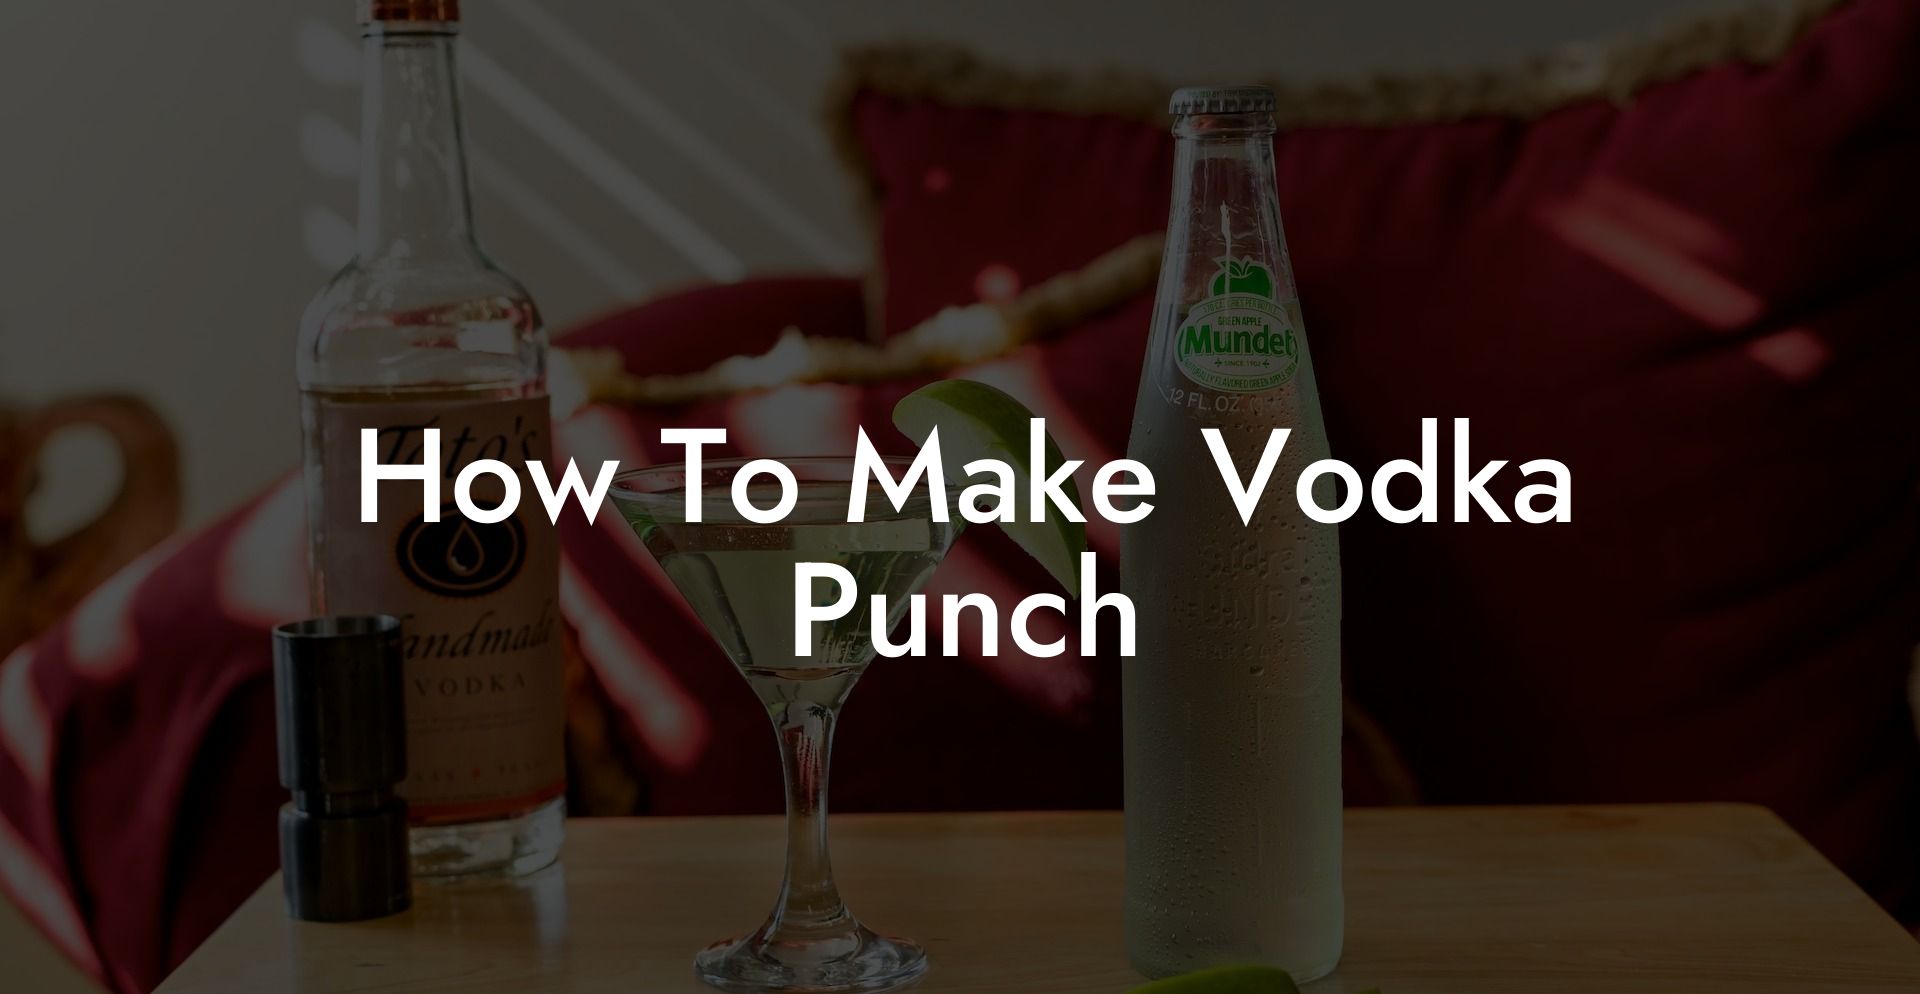 How To Make Vodka Punch